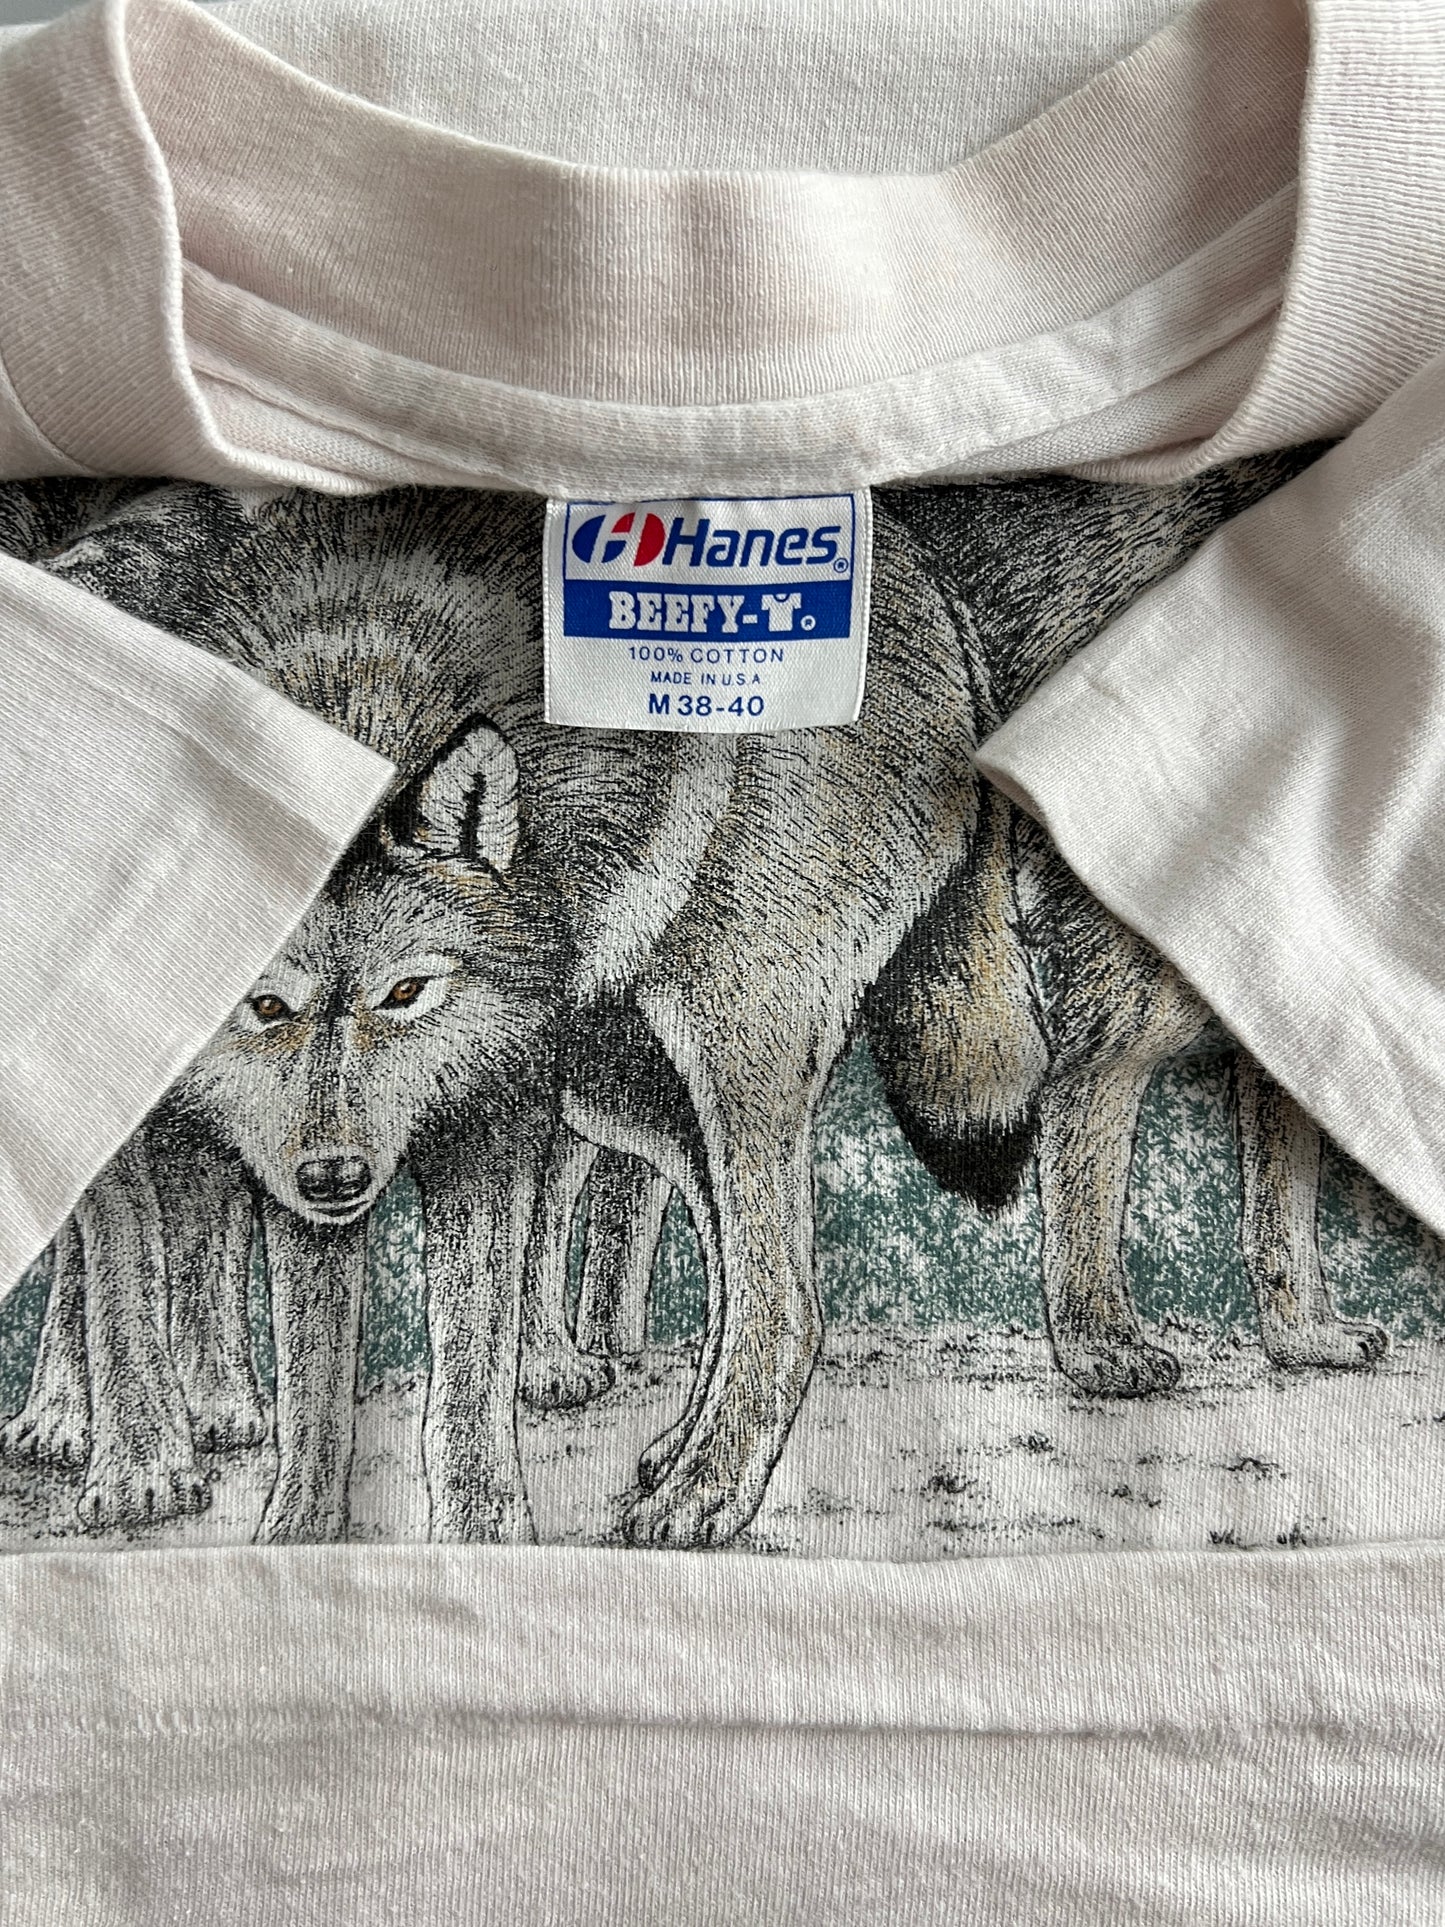 80's Wolves Tee [M]